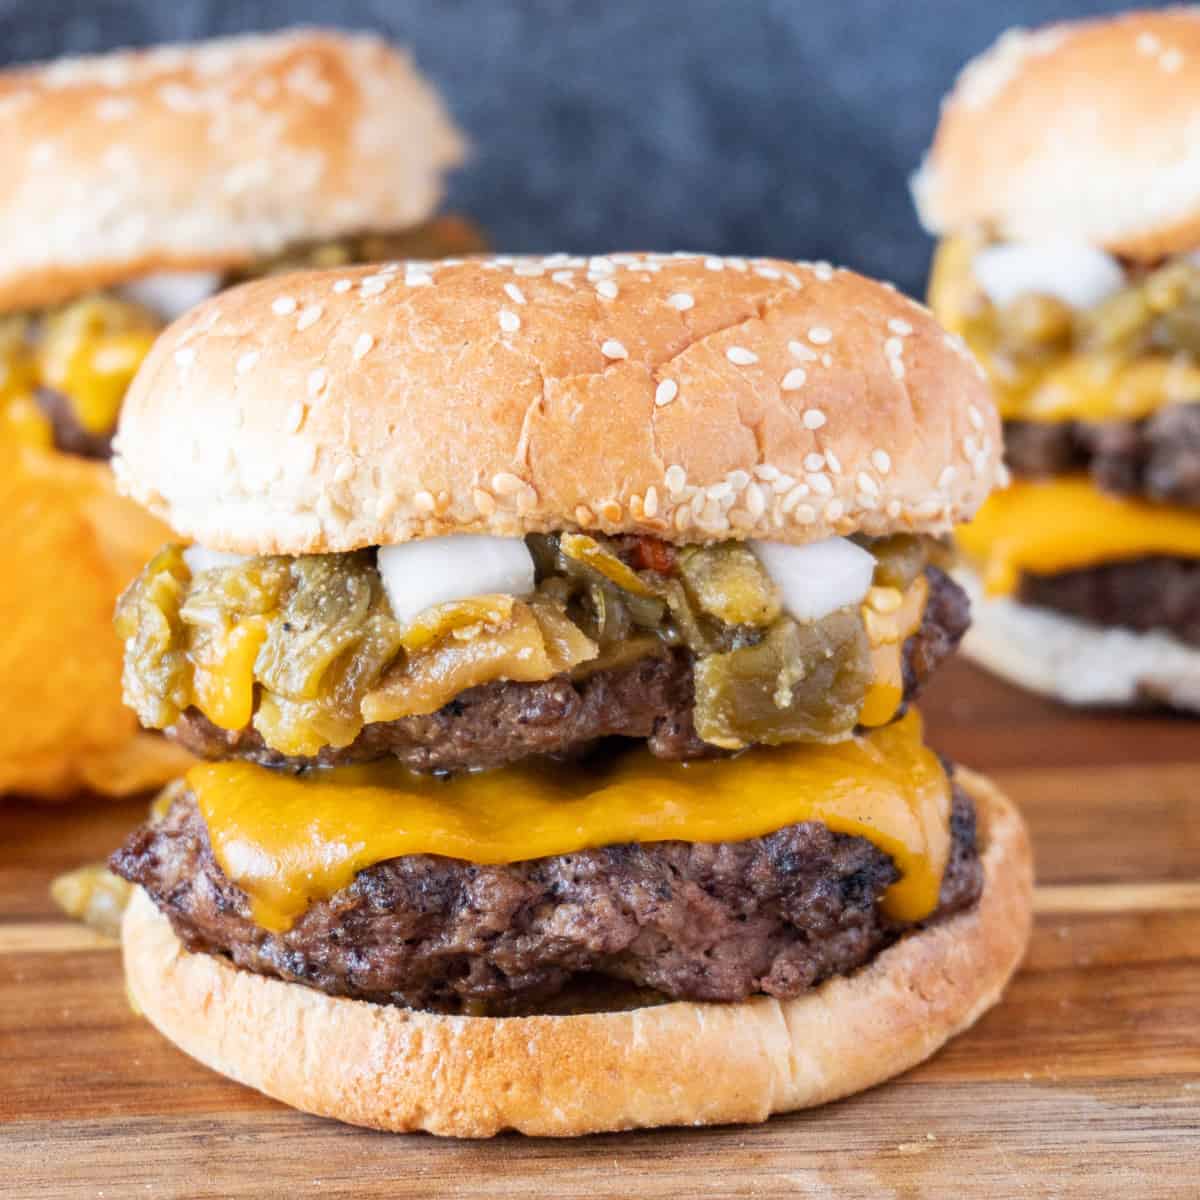 Green Chile Cheeseburger featured image